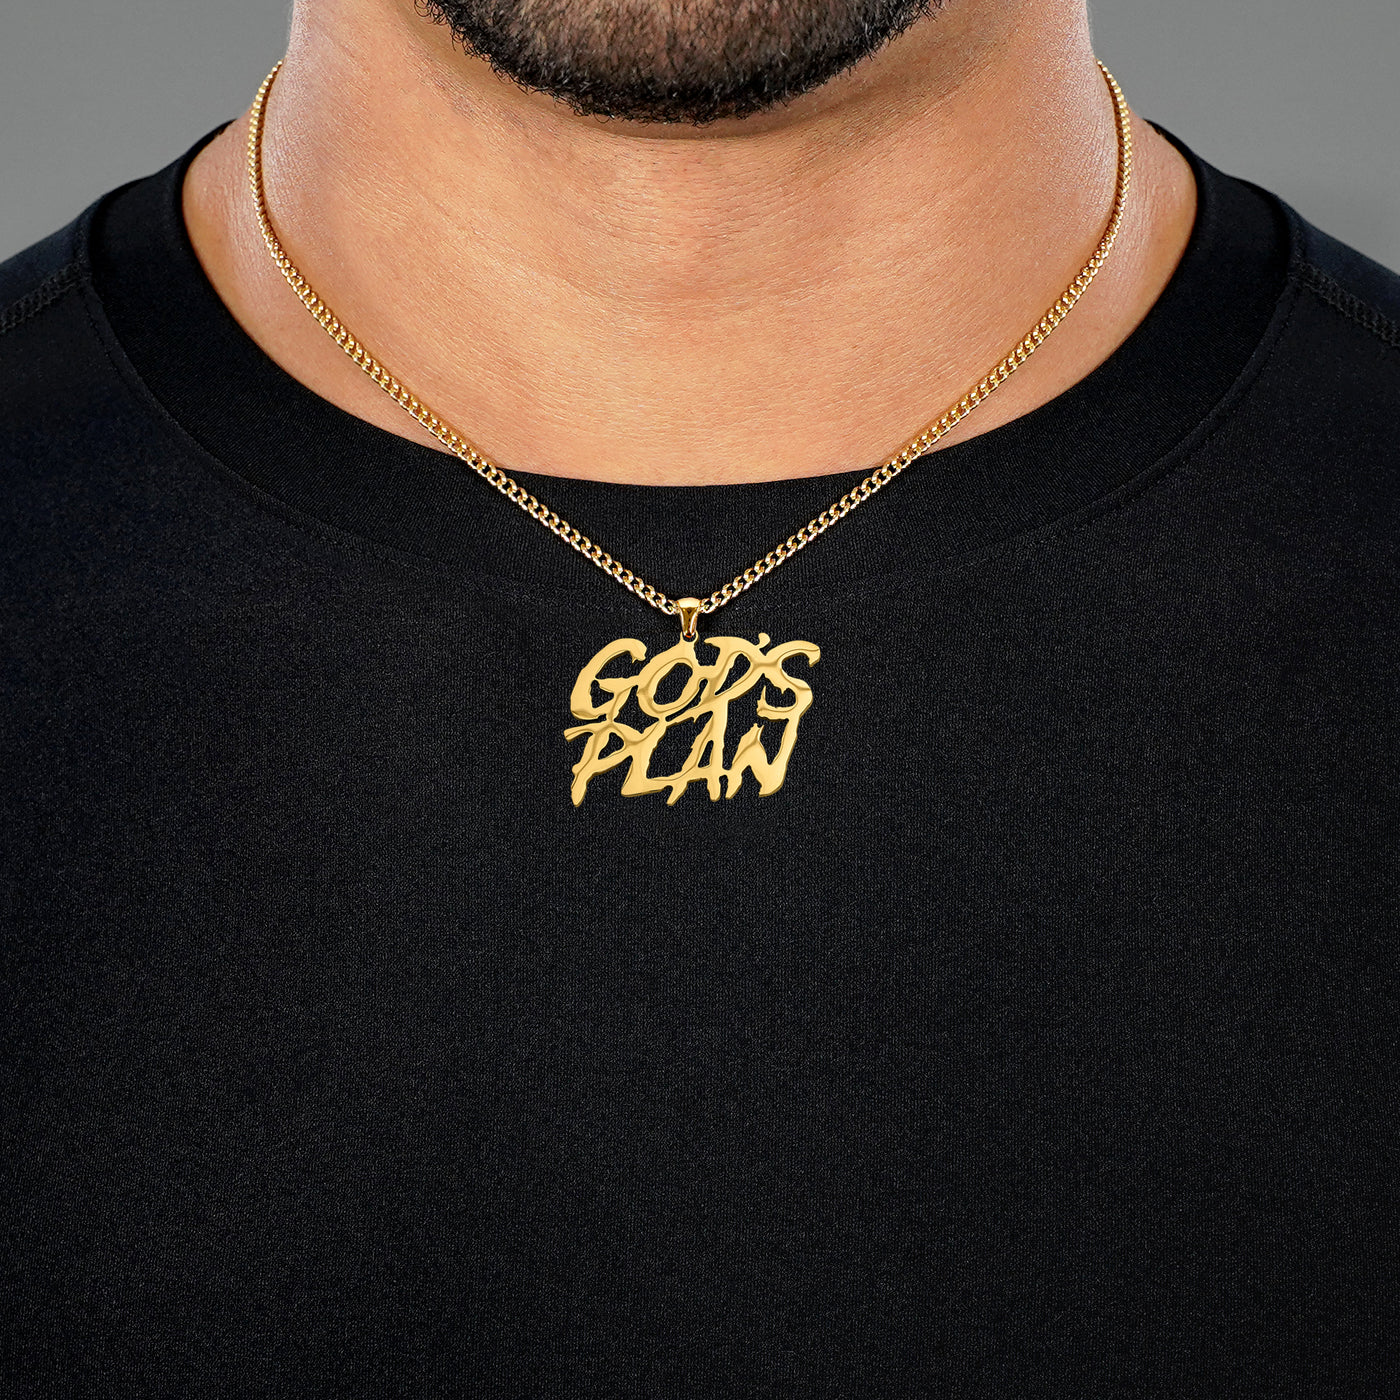 God's Plan Pendant with Chain Necklace - Gold Plated Stainless Steel